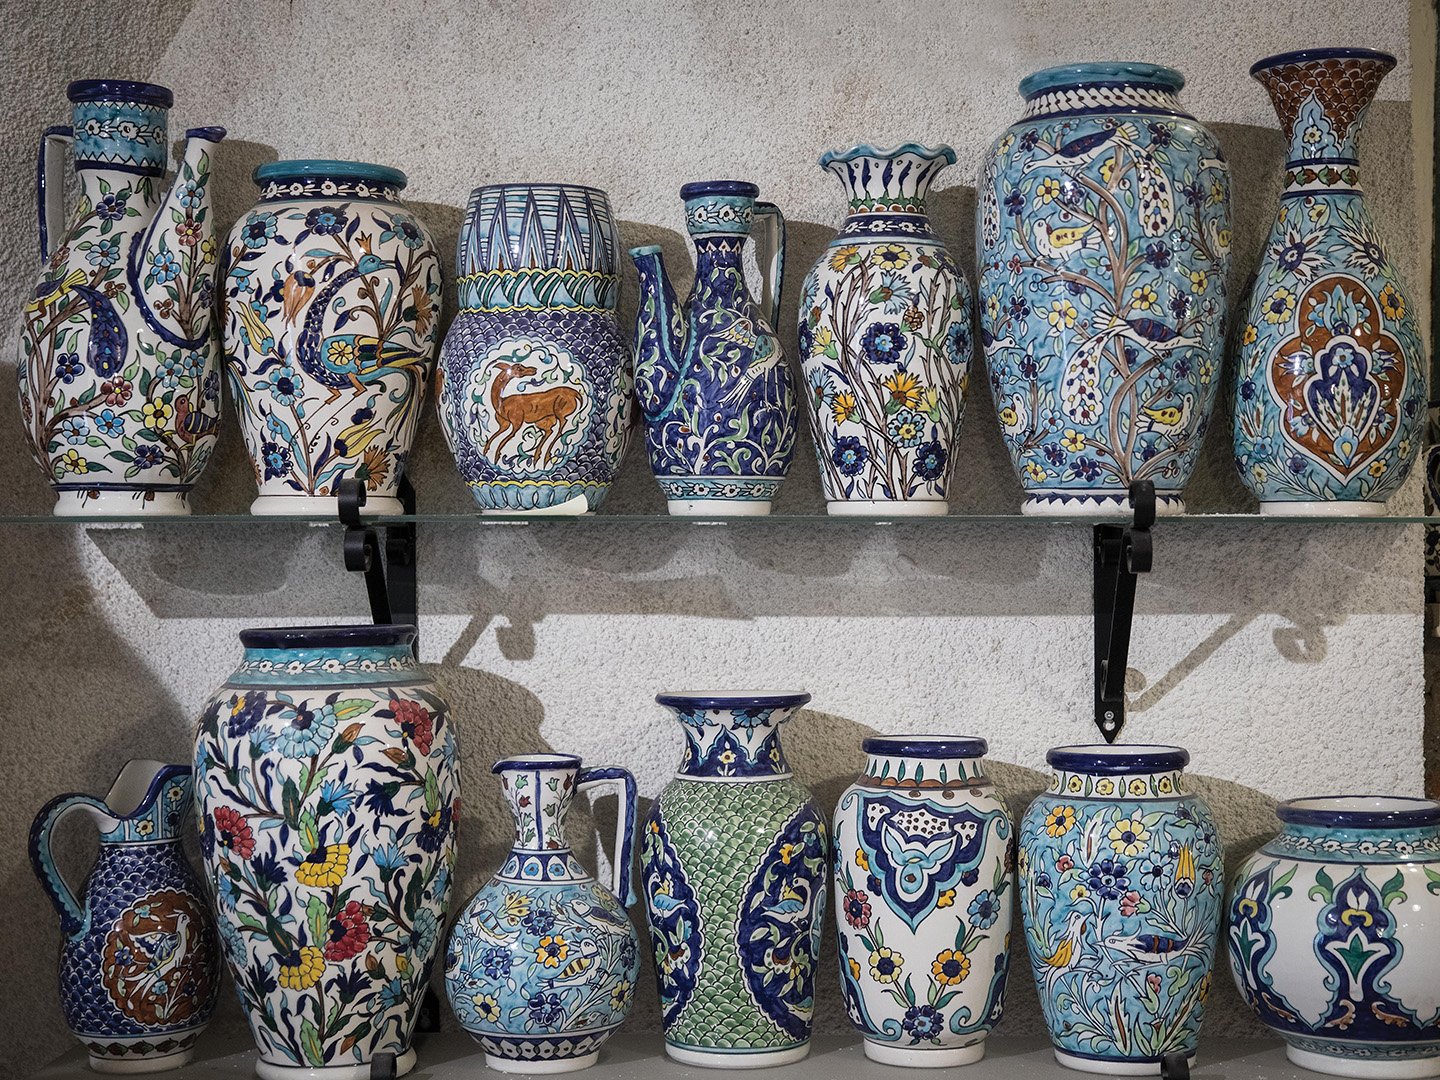 An assortment of vases on display in Nshan Balian’s shop.